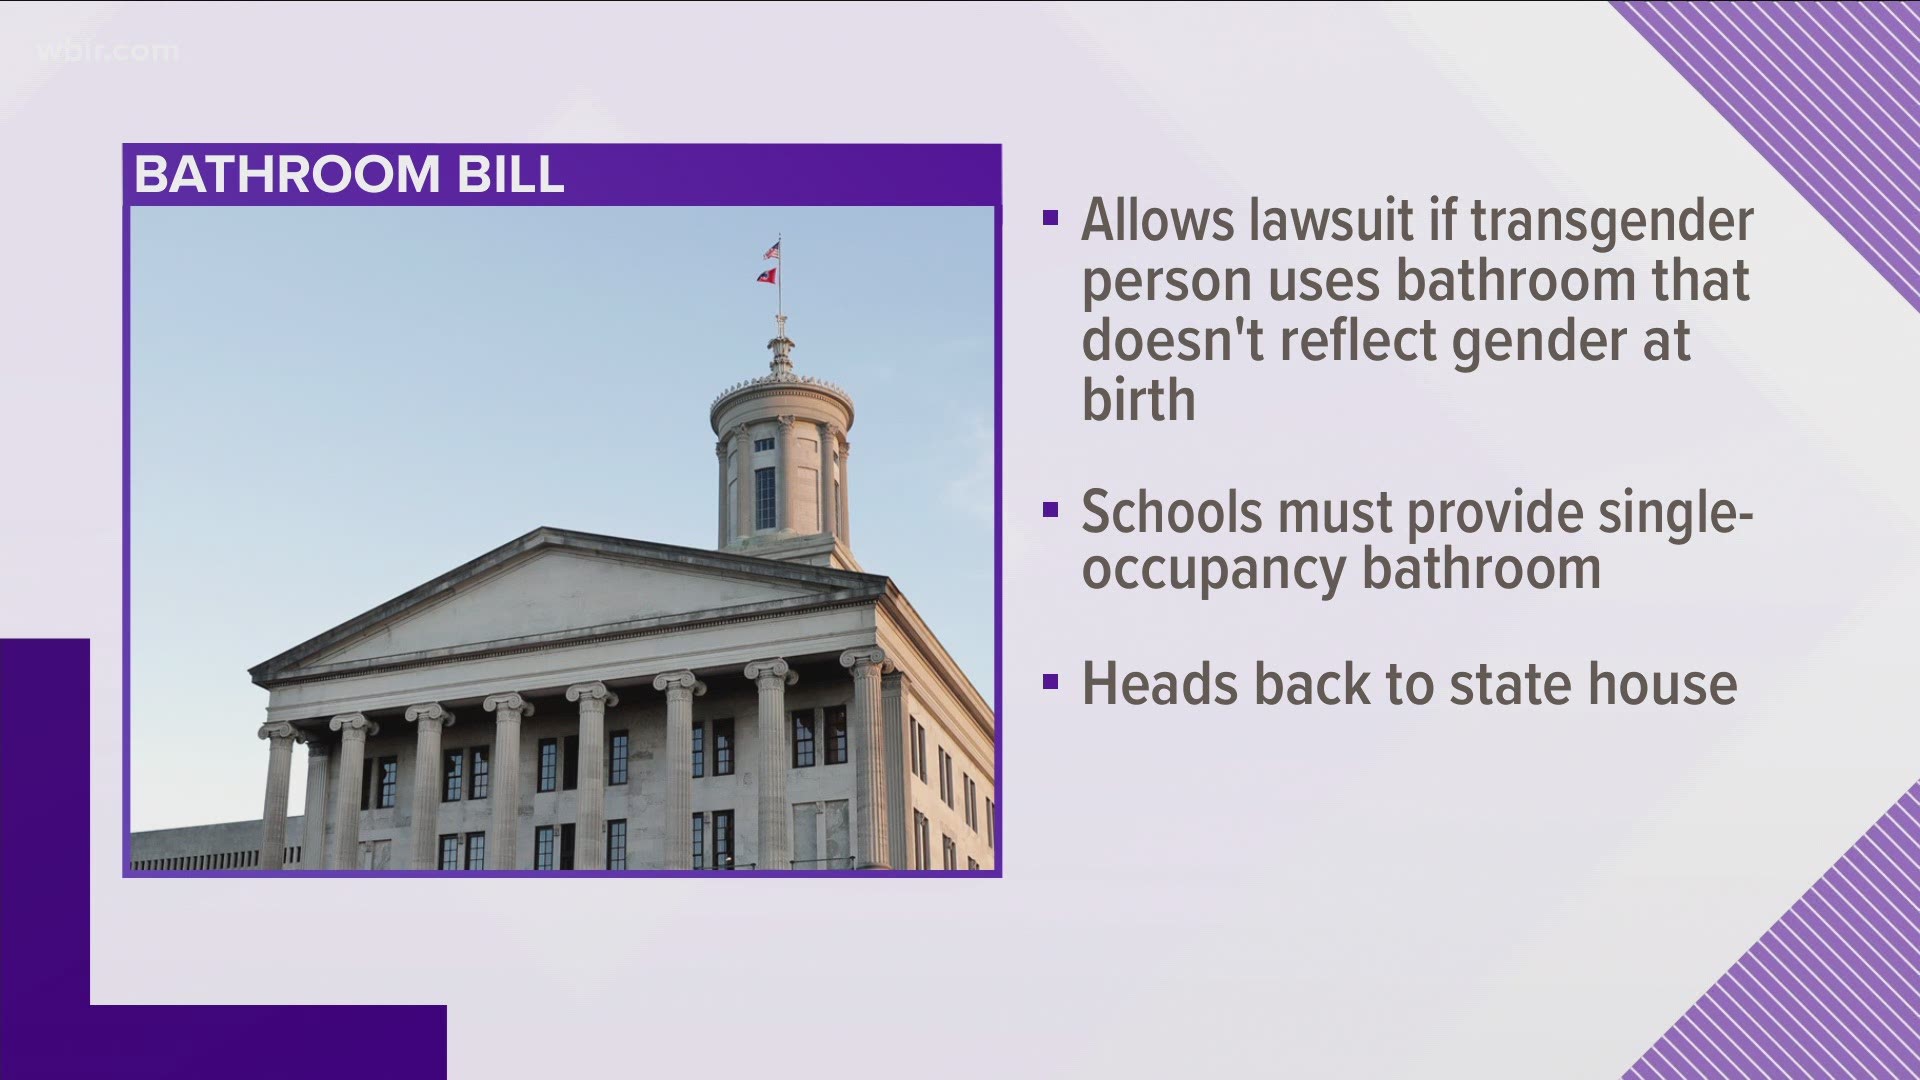 The bill targets people who are transgender, clearing a path for people to sue school leaders.